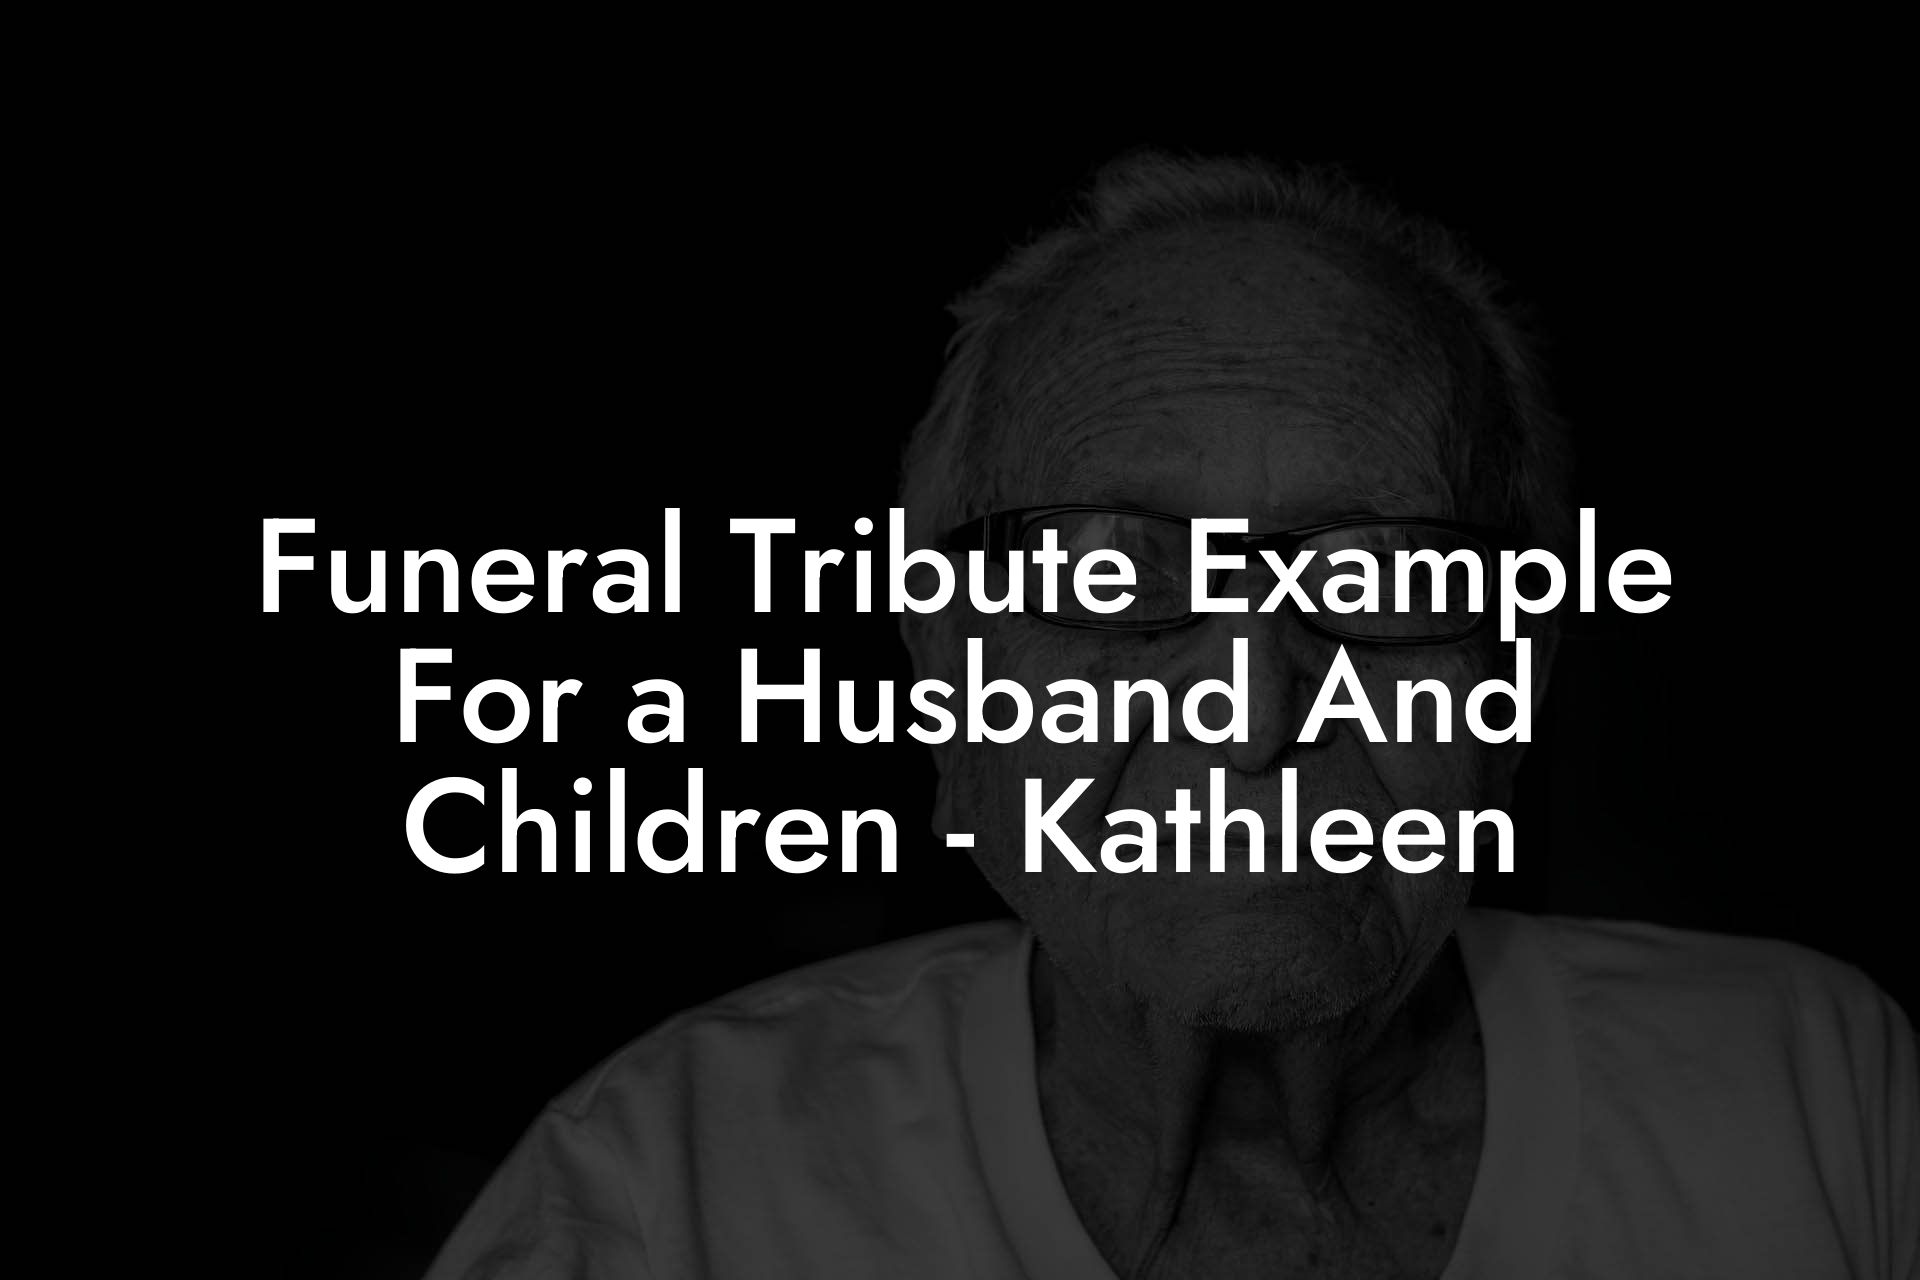 Funeral Tribute Example For a Husband And Children - Kathleen